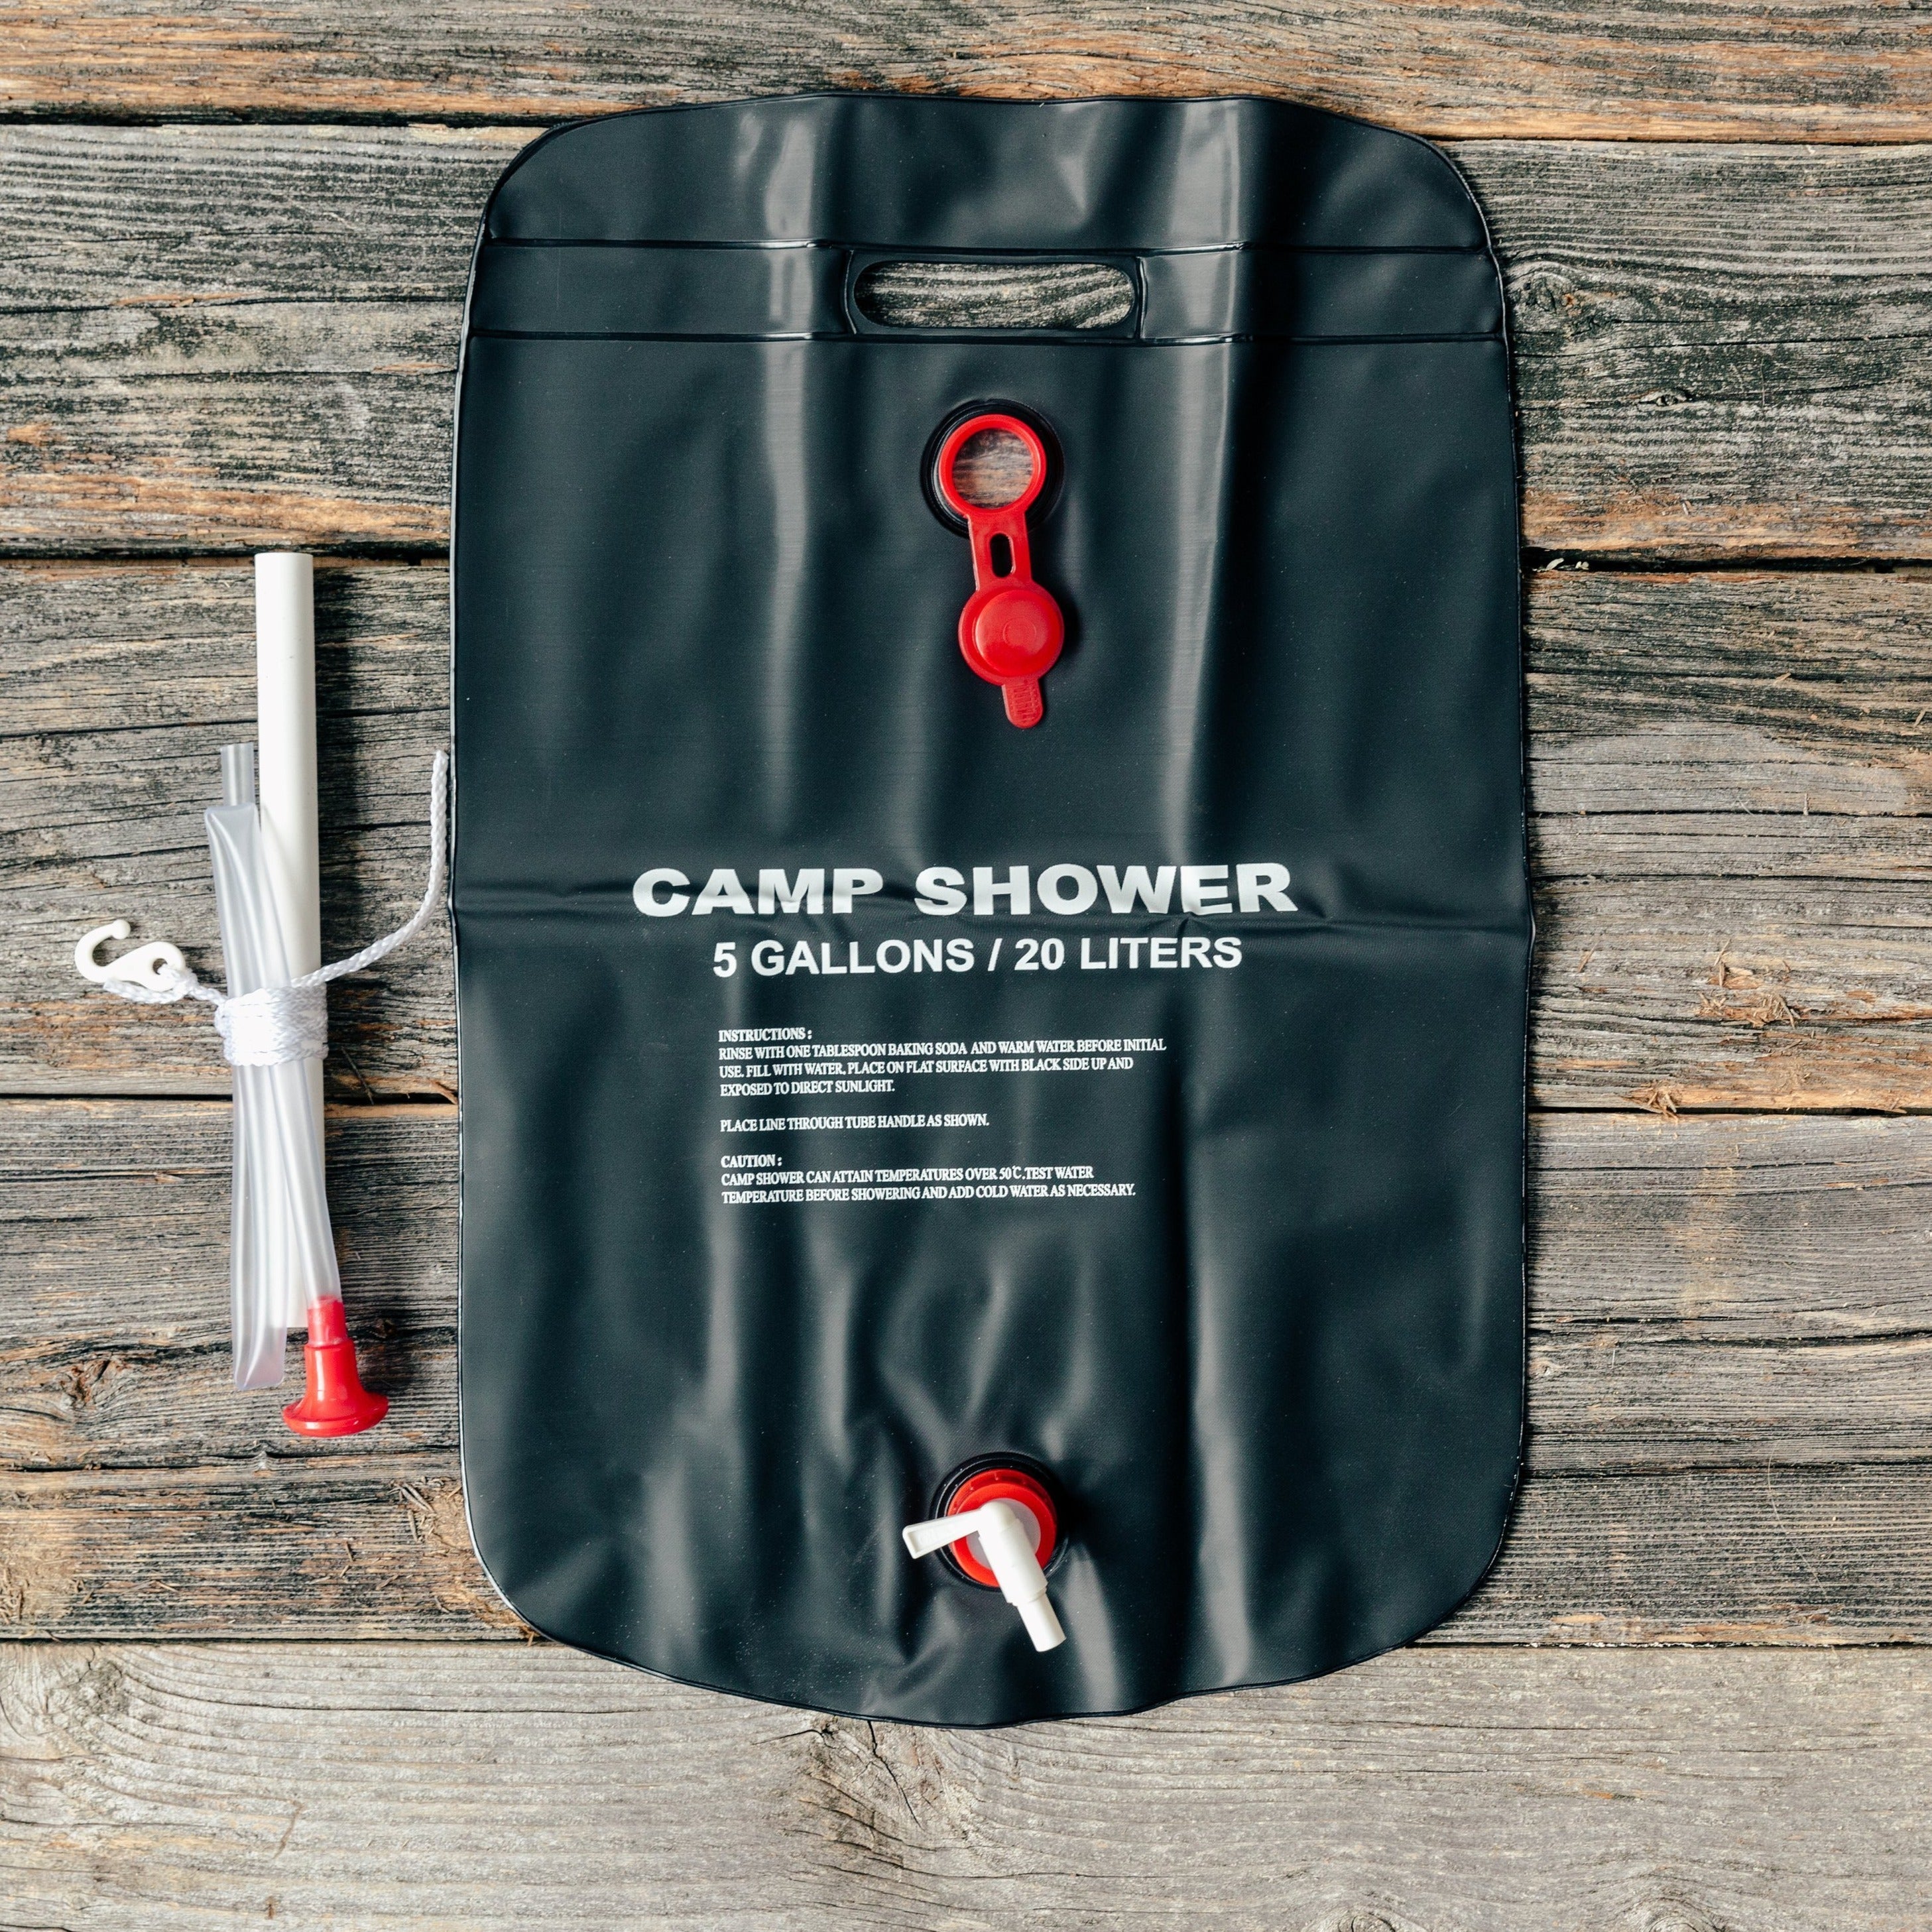 Pacific Rayne | Portable Camping Shower Bag - 5 Gallon Capacity, , Pacific Rayne, Defiance Outdoor Gear Co.